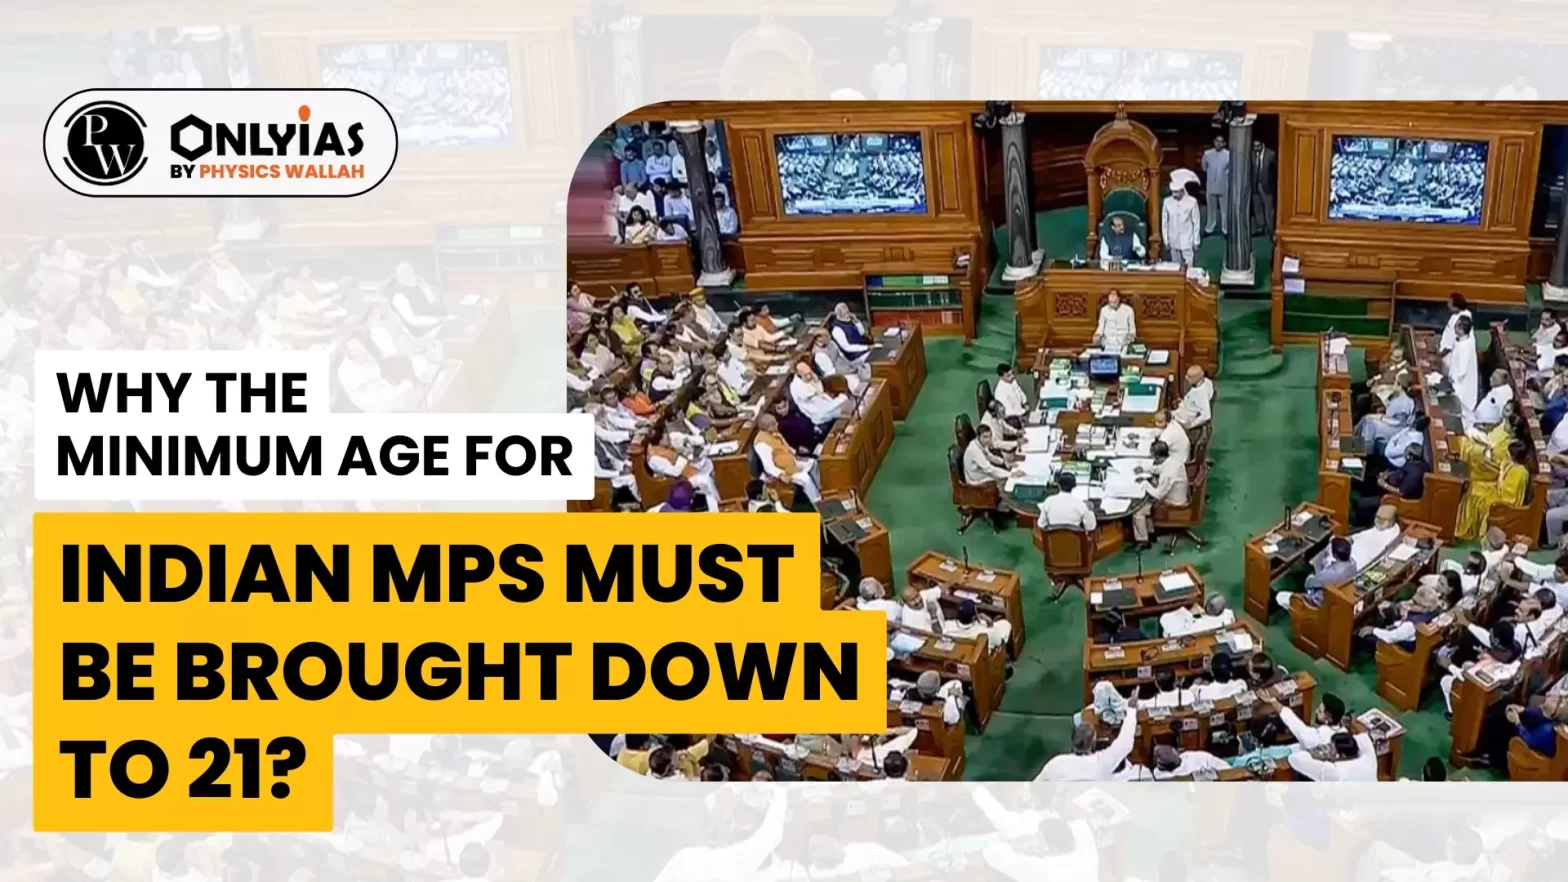 Why the Minimum Age for Indian MPs Must be Brought Down to 21?